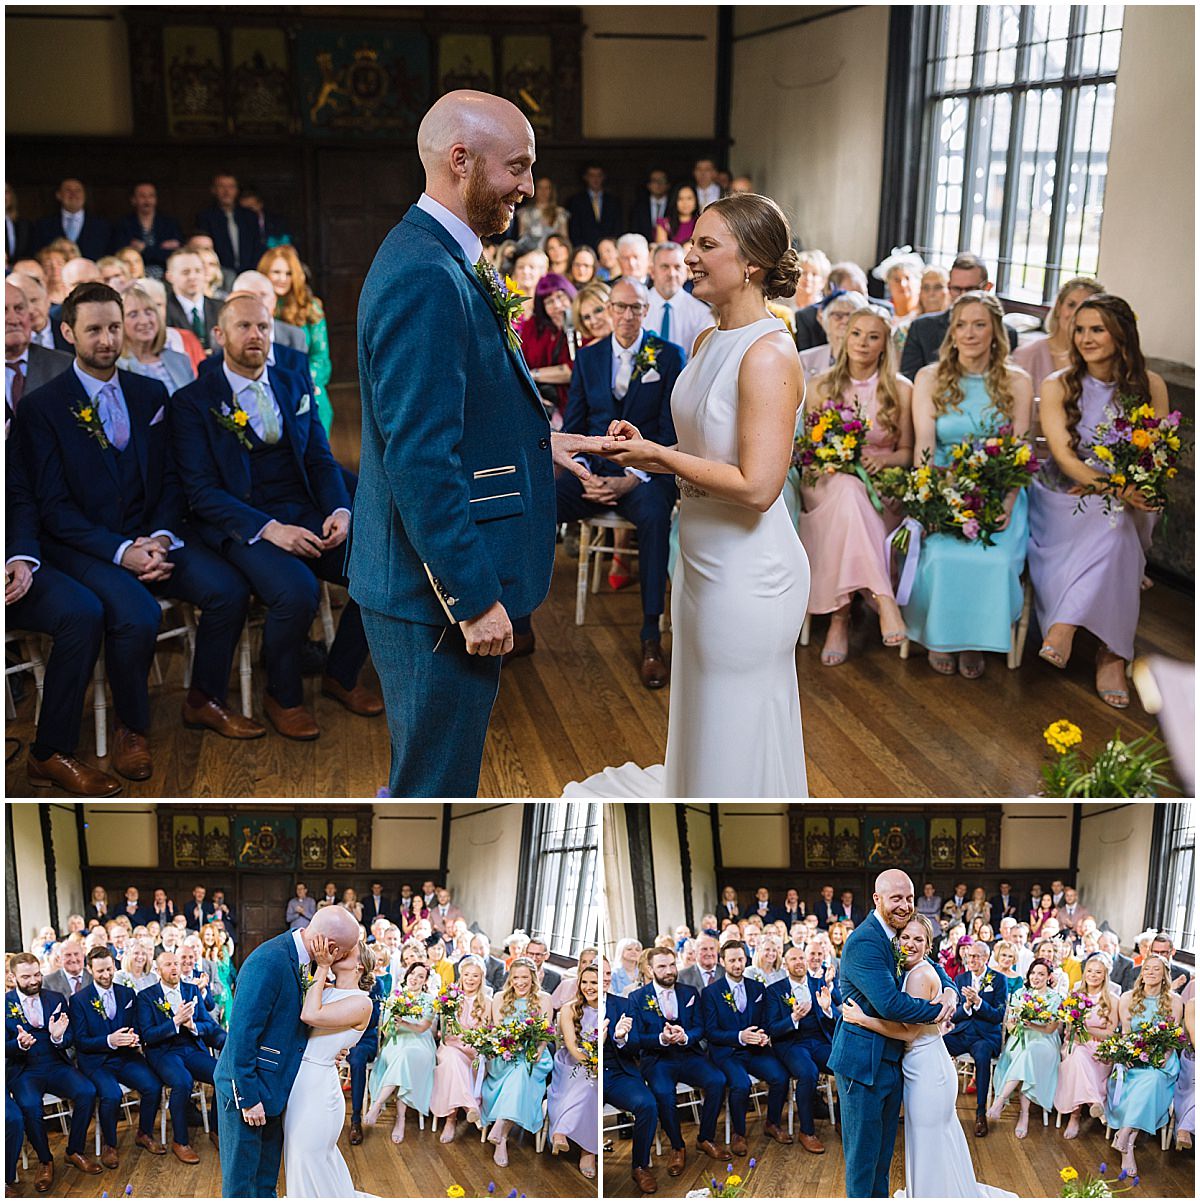 A collage of three wedding ceremony photos showing a bride and groom exchanging vows and rings in front of seated guests, sharing a kiss, and receiving applause from the attendees. The couple smiles joyfully, and the setting features historical architecture with large windows. The guests and bridal party are dressed in formal attire, with some holding colorful flower bouquets.